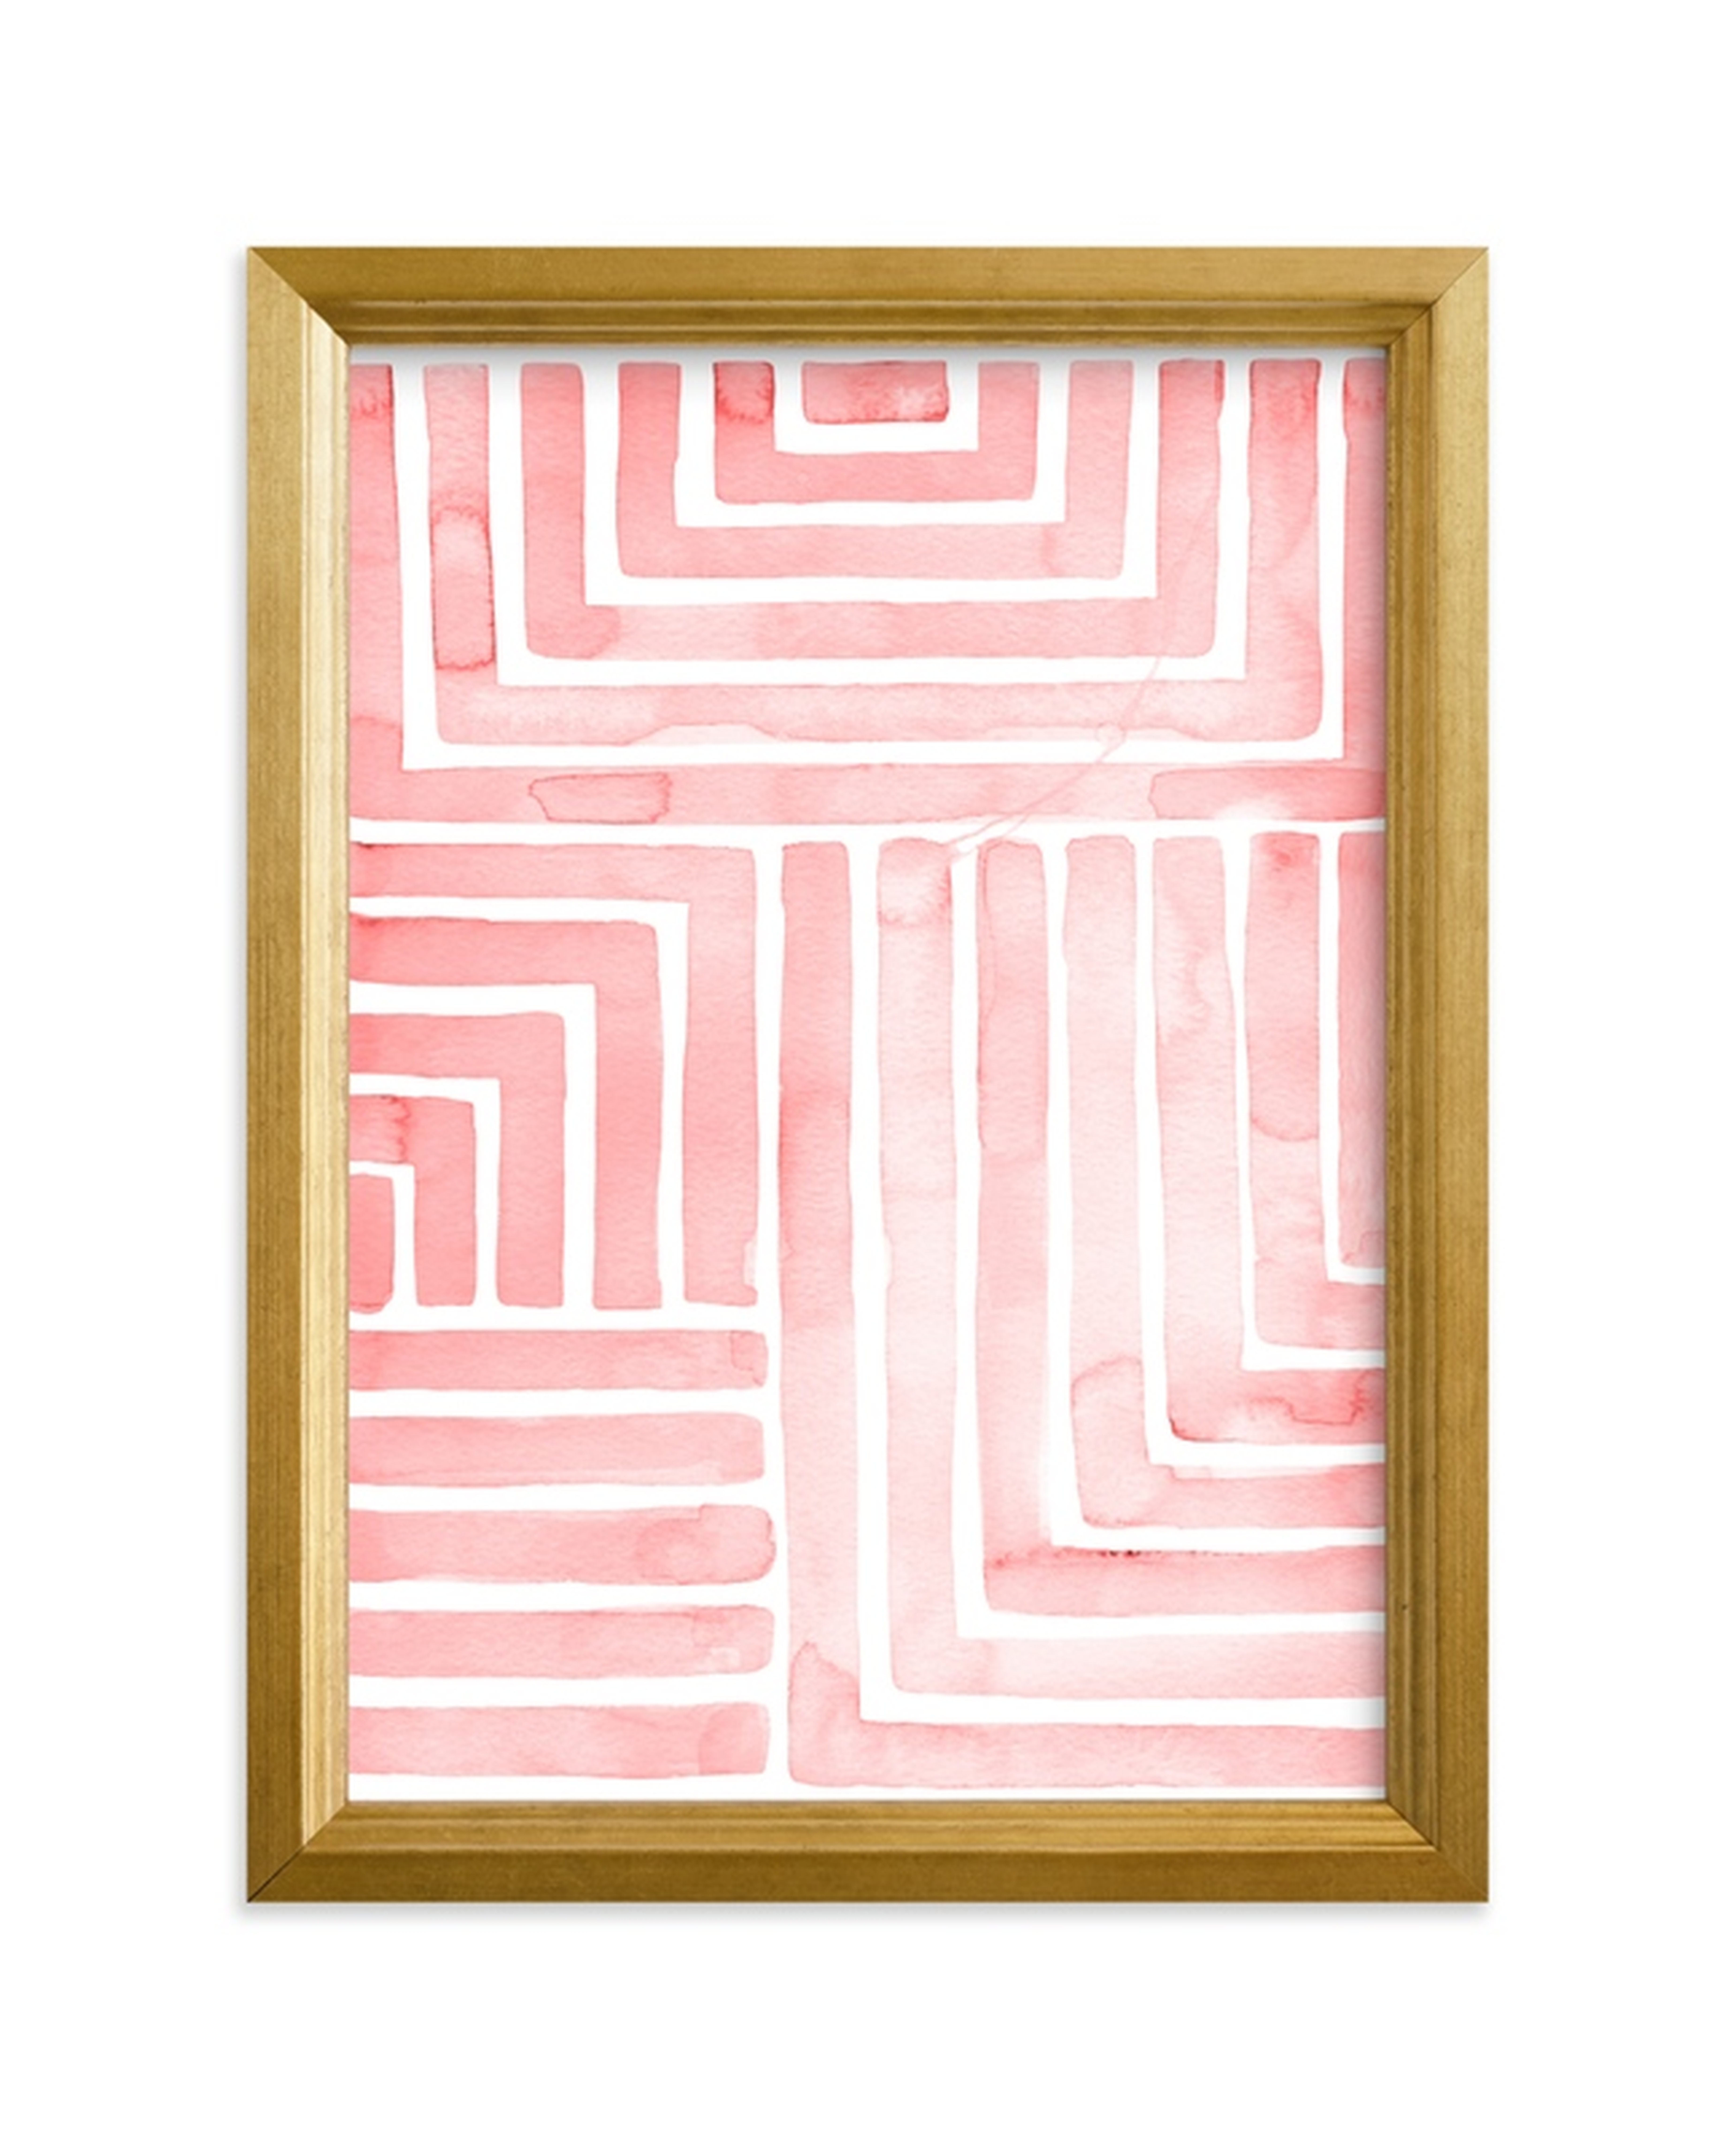 Hard & Soft  Limited Edition Art,5"x7", Gilded Wood Frame, Standard Plexi & Materials, White Border - Minted